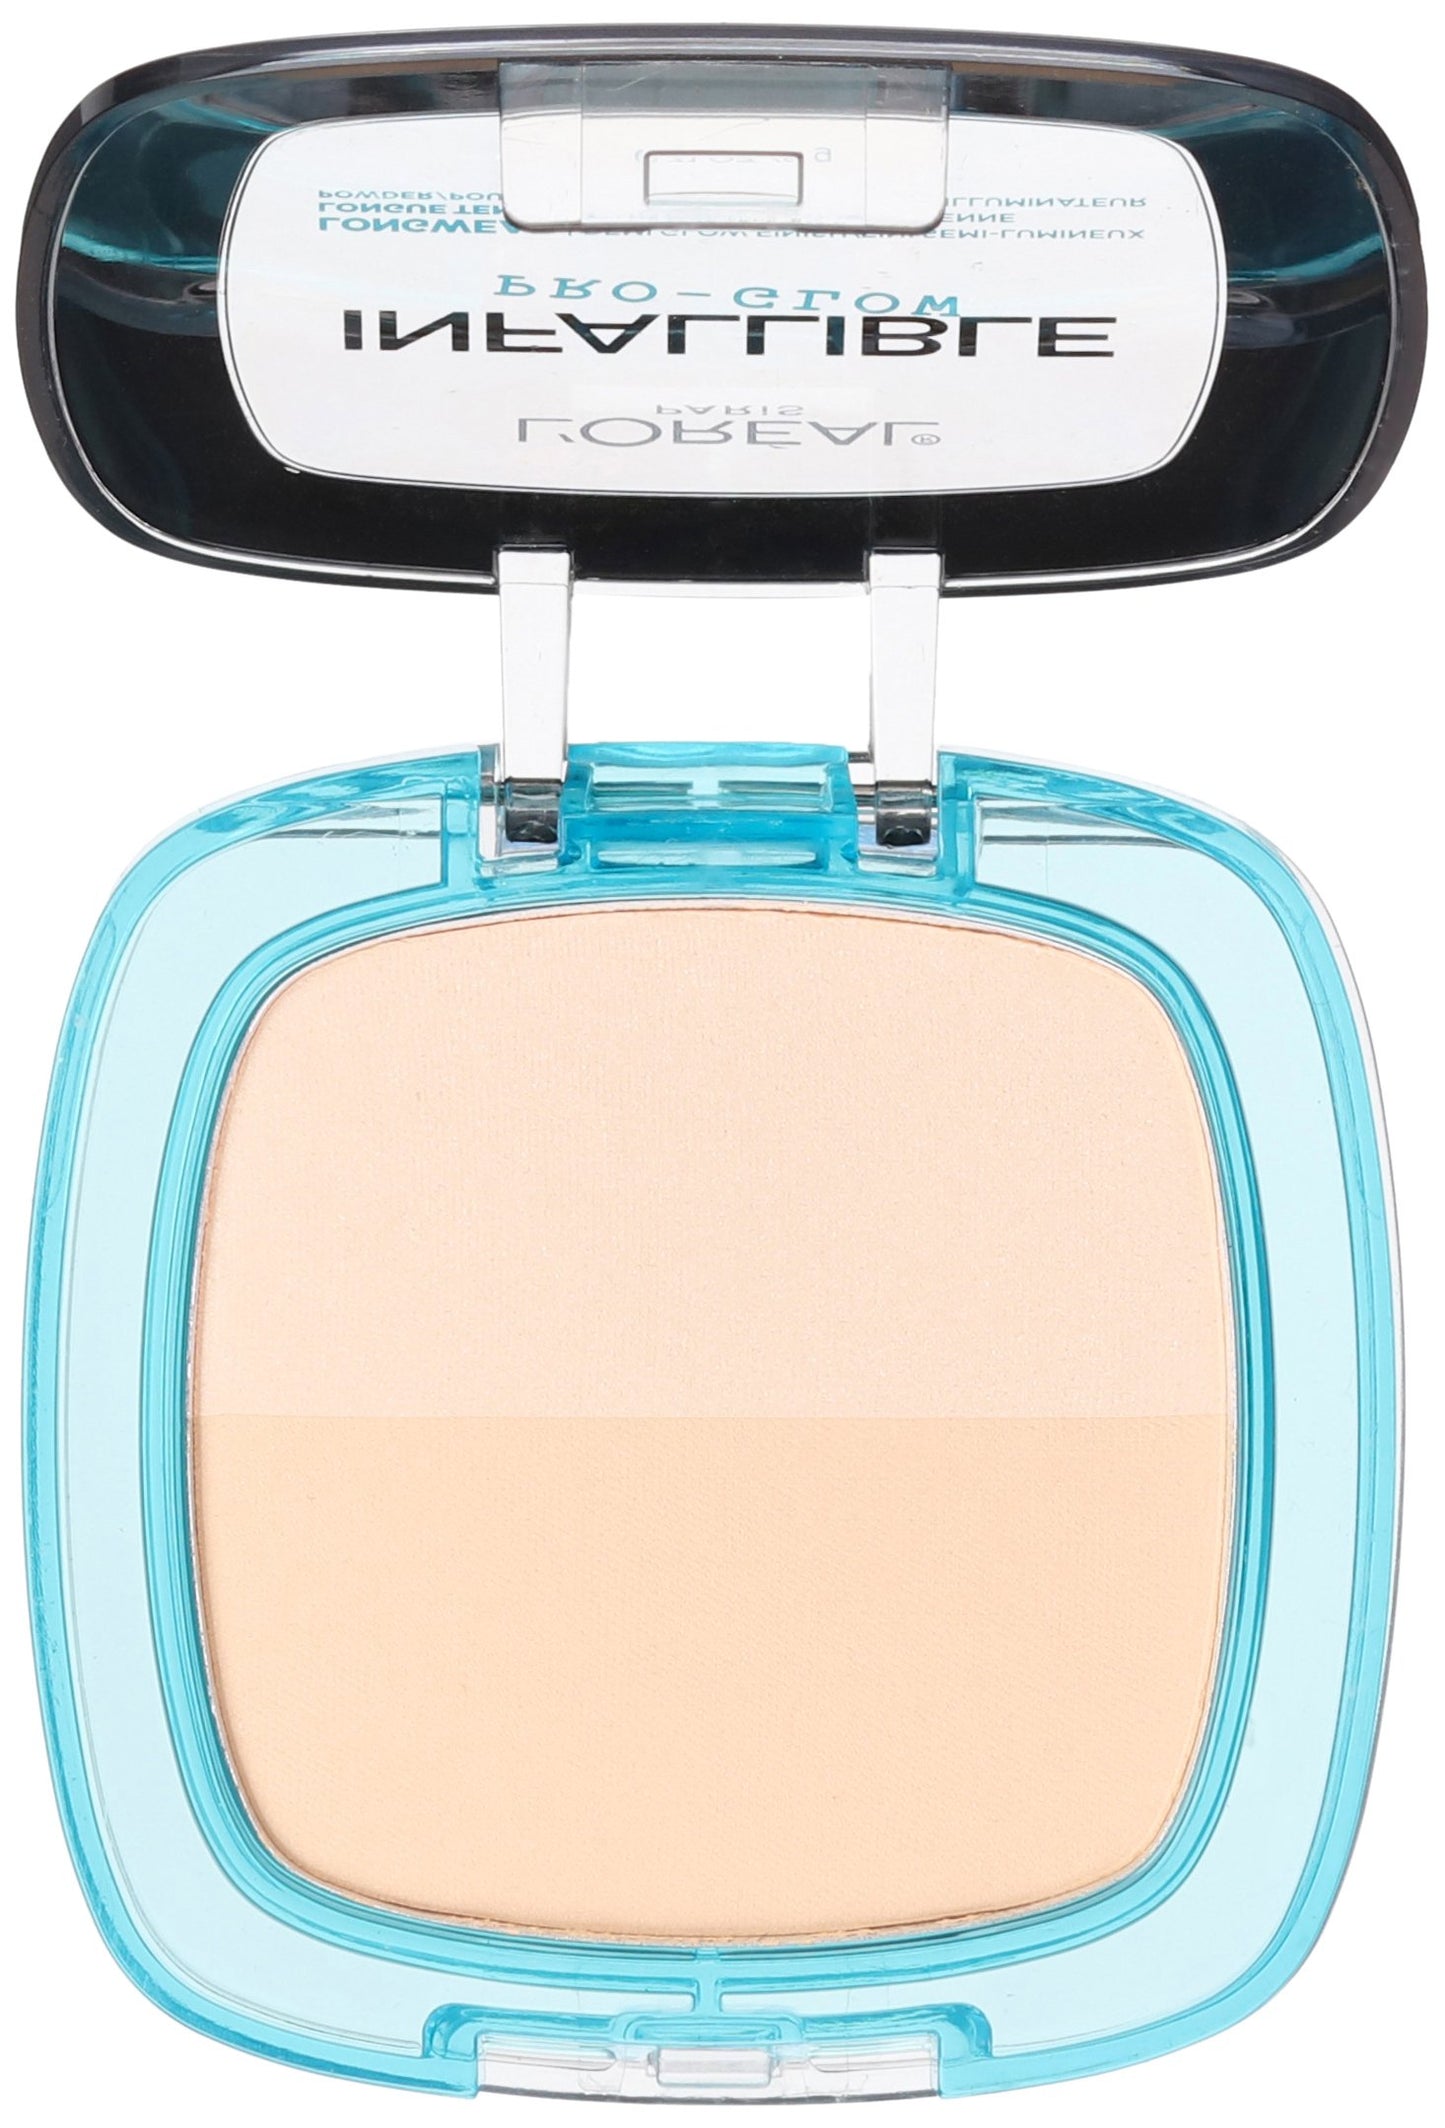 L'Oreal Paris Infallible Pro Glow Pressed Powder, Classic Ivory, 0.31 Ounce